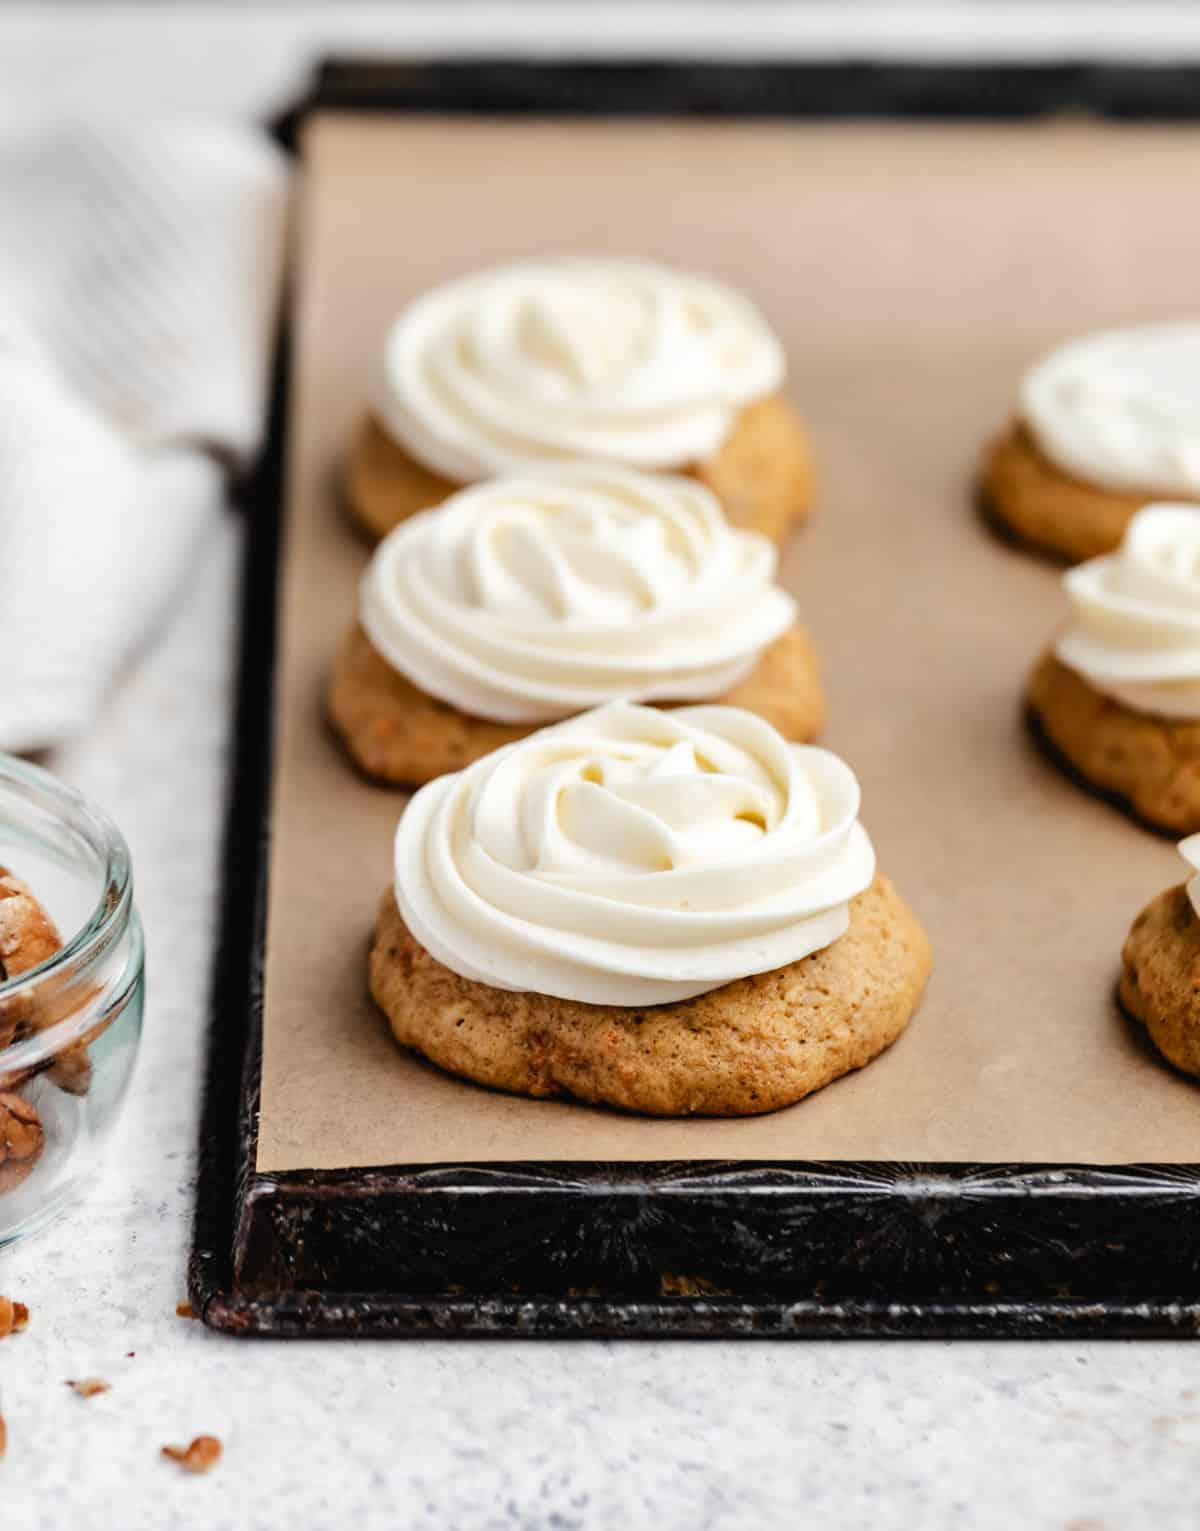 Frosted carrot cake cookies next to a dish of chopped pecans.